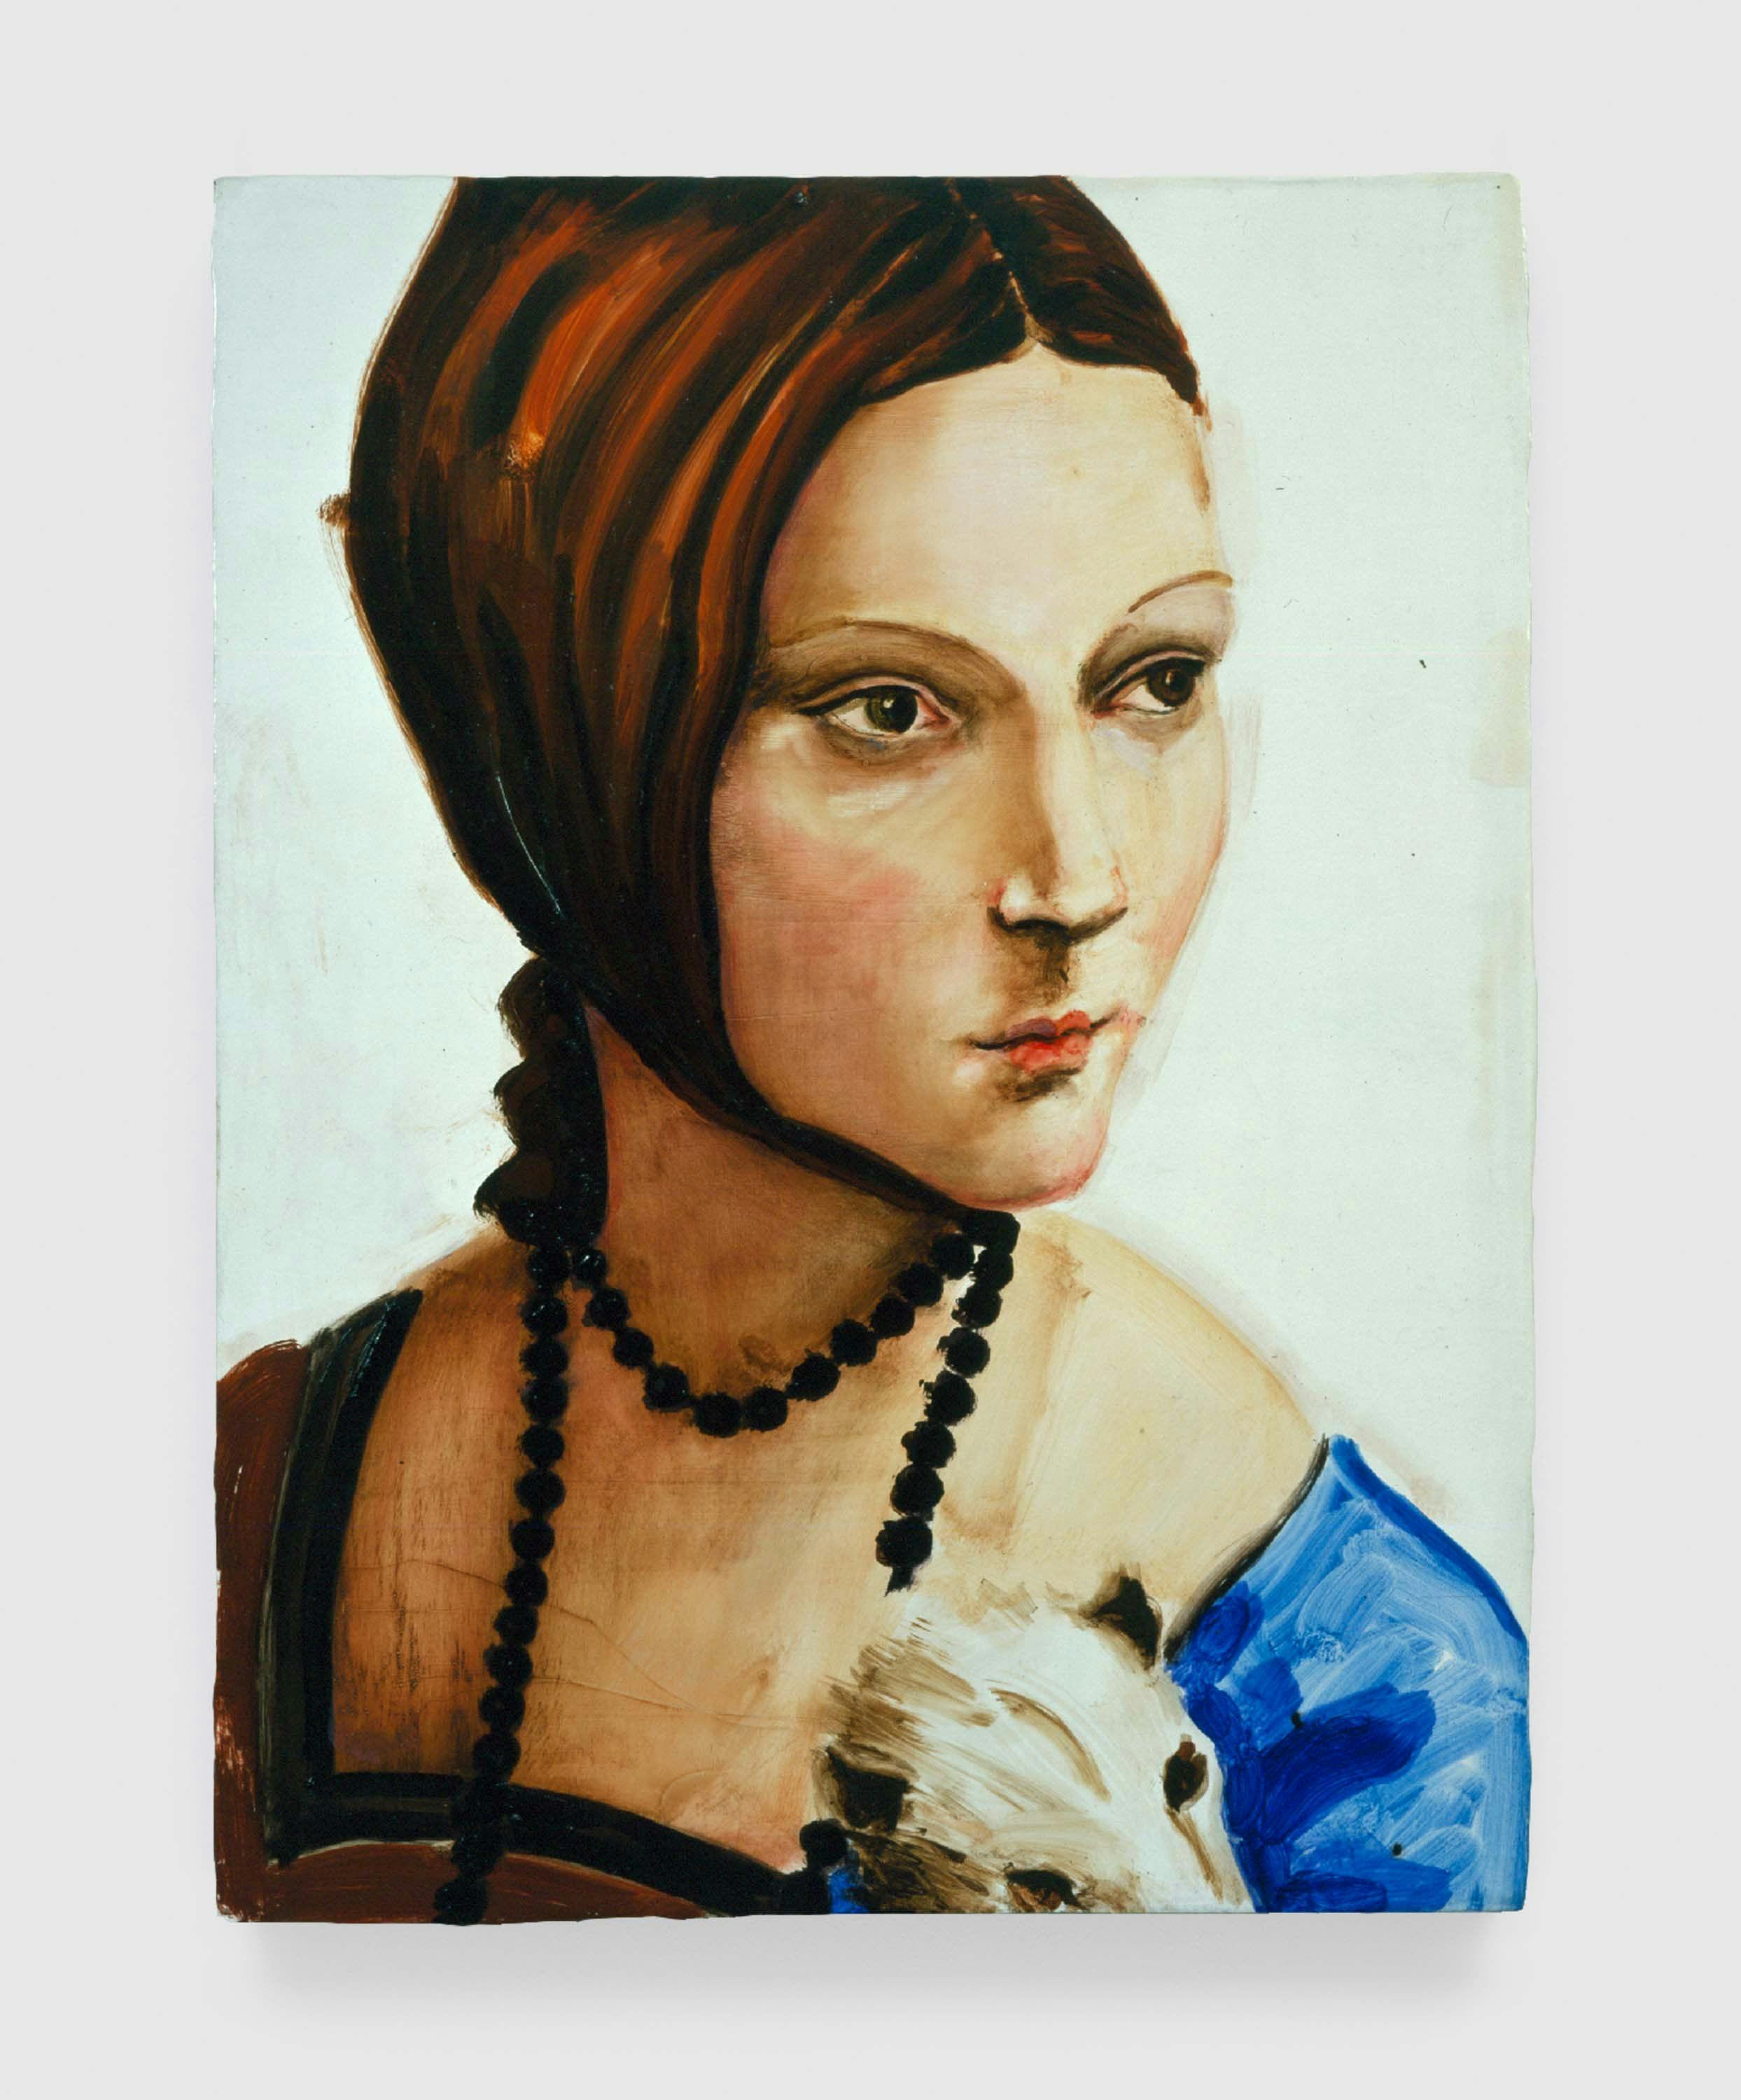 A painting by Elizabeth Peyton, titled Lady with an Ermine 1489-90 (After Leonardo da Vinci), dated 2003.